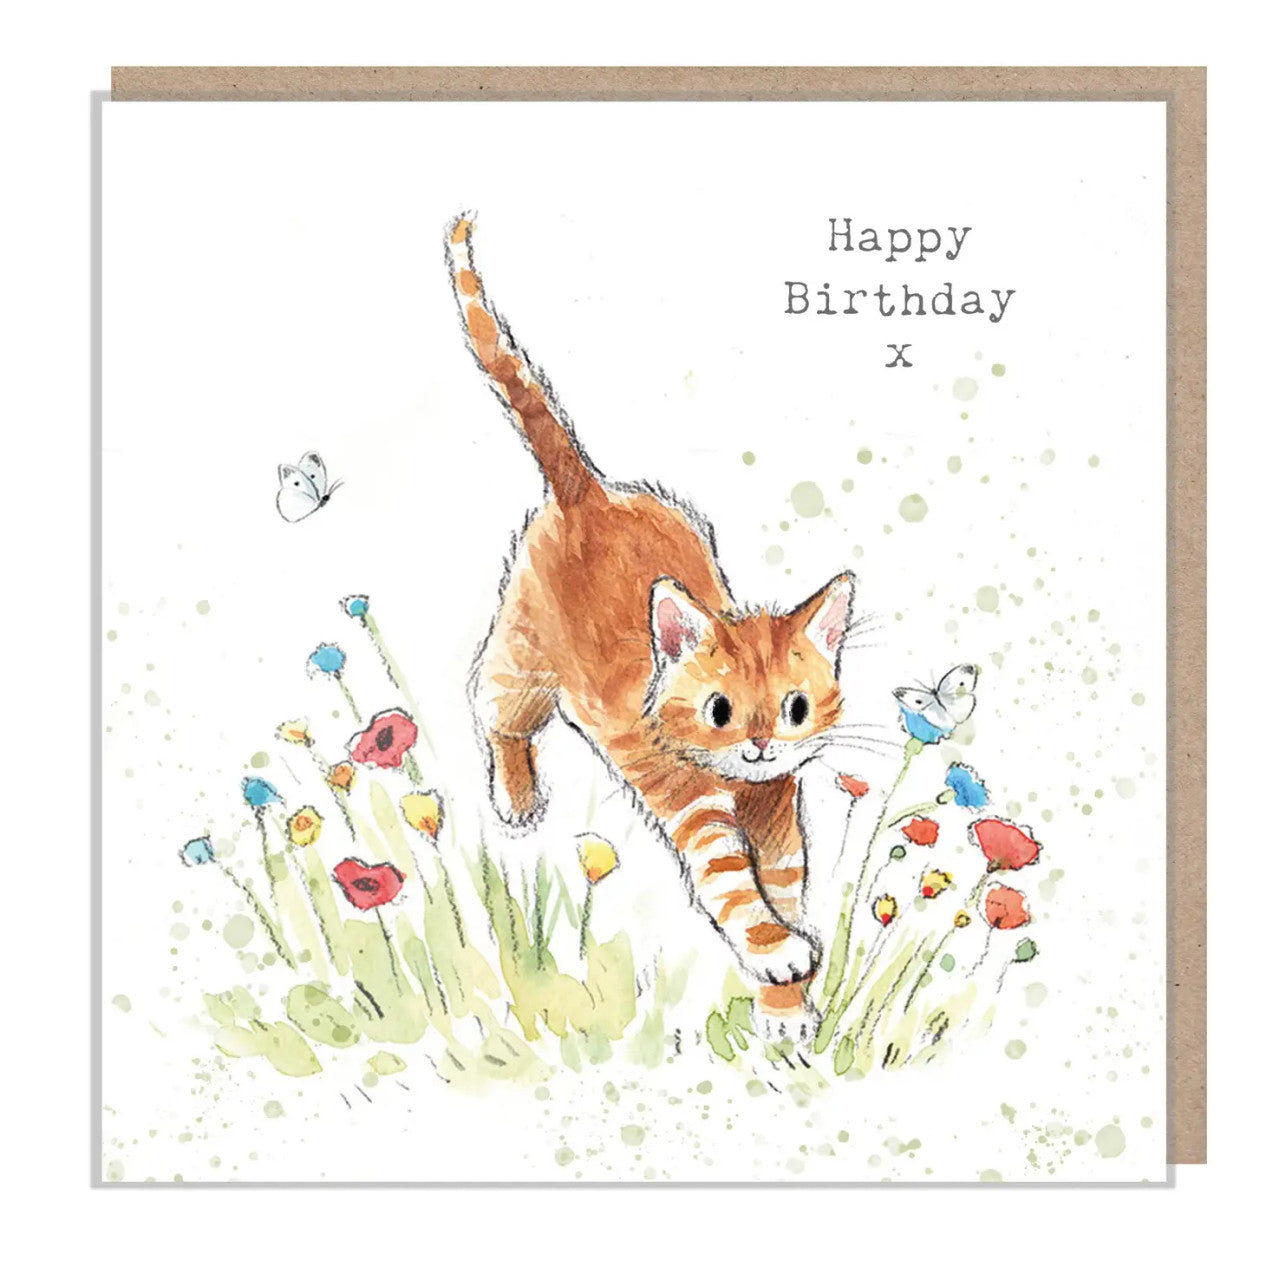 Cat Jumping through Flowers Happy Birthday Greetings Card by Paper Shed Design Card by Paper Shed Design